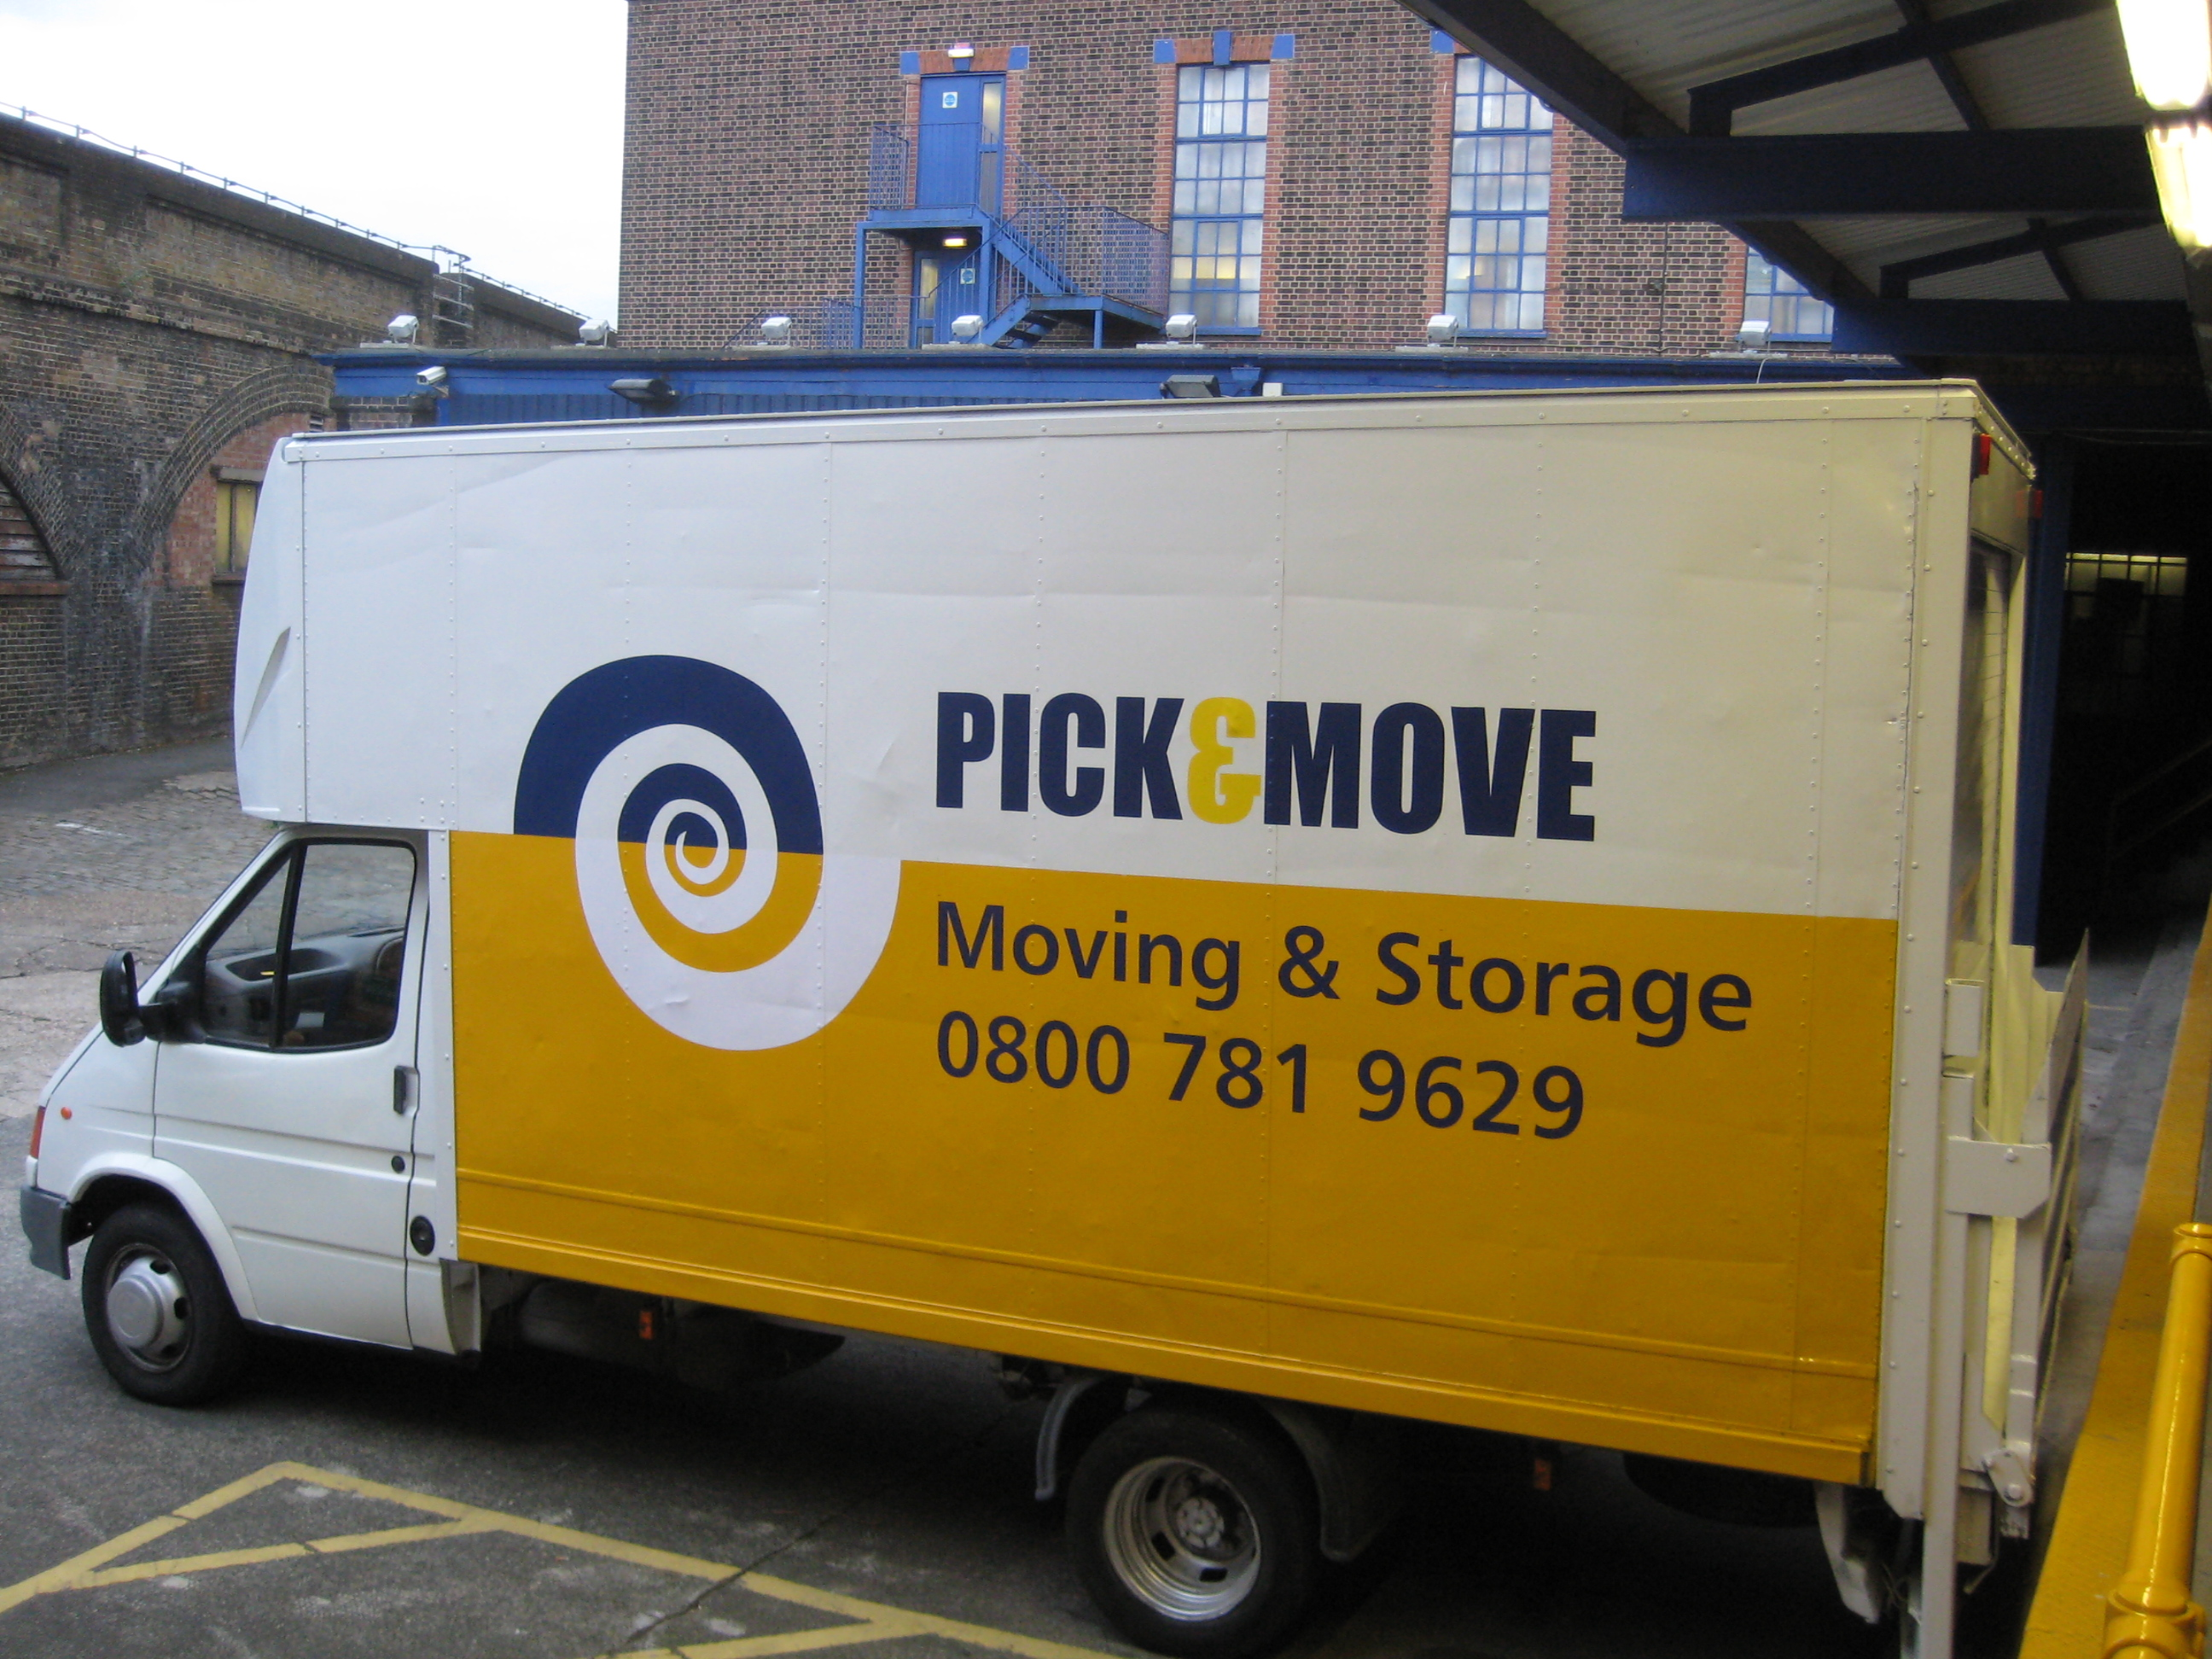 Removals van getting ready to help Londoners with moves